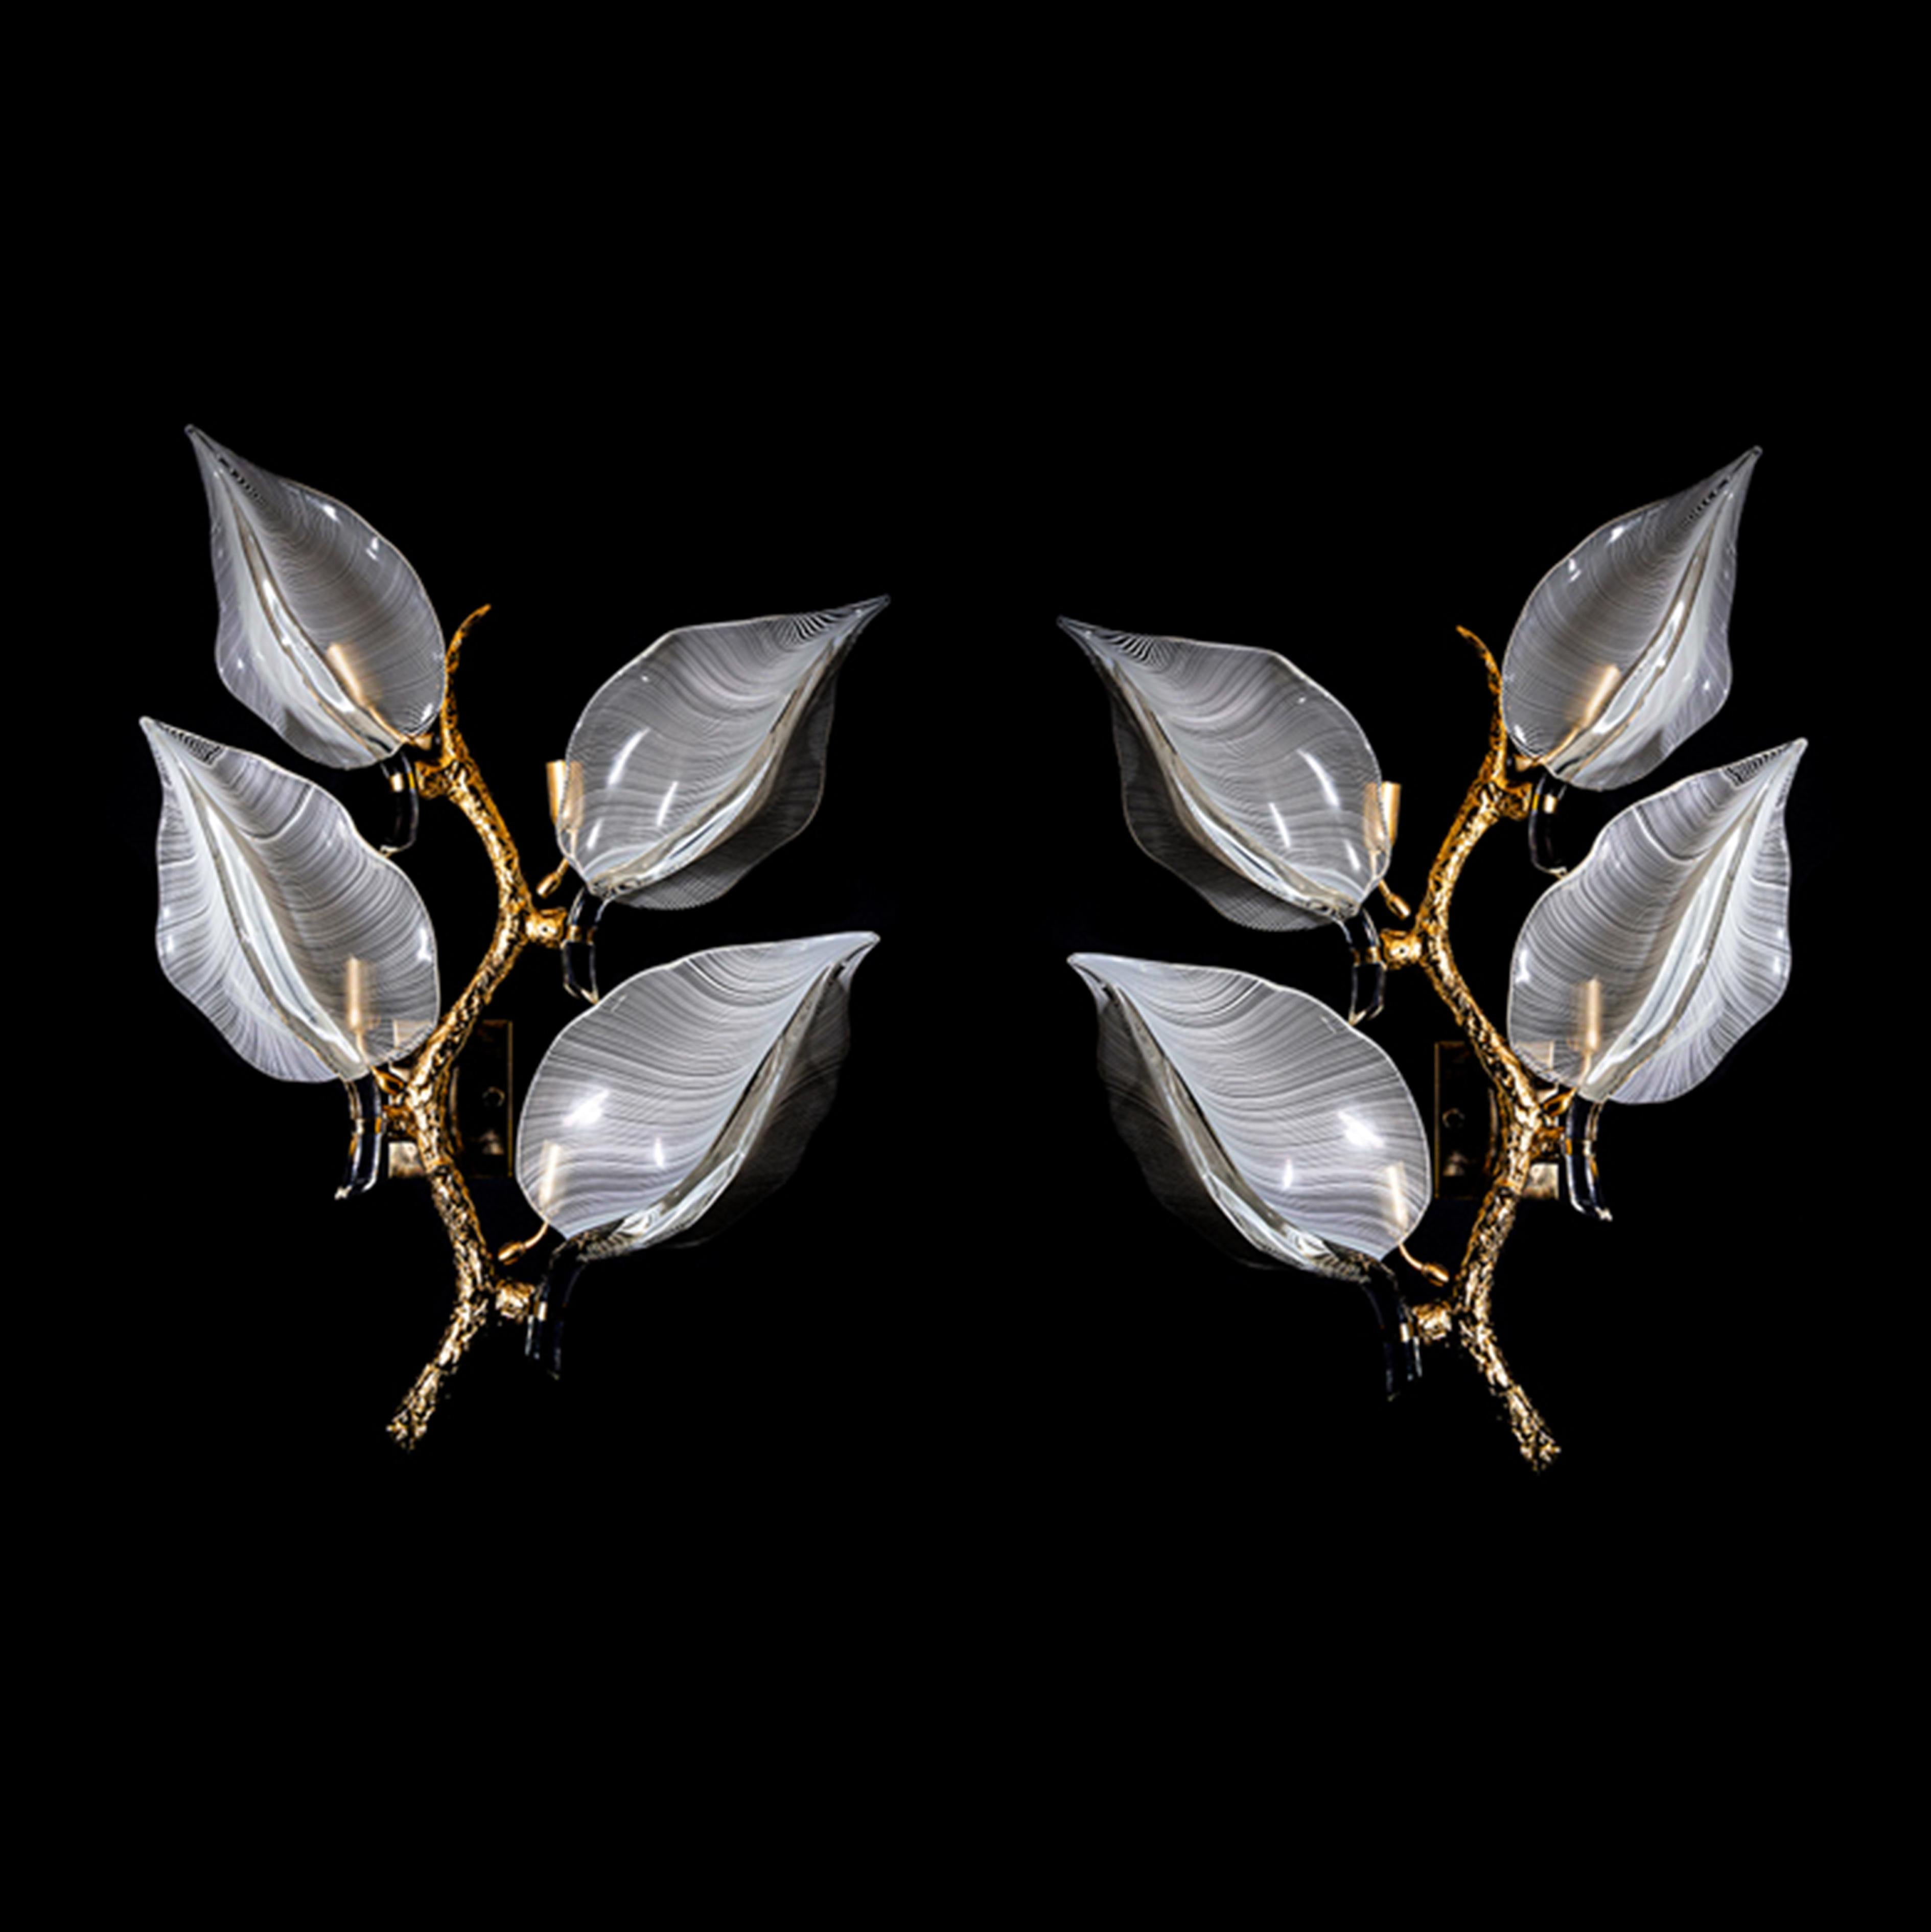 A large pair of bronze wall lights by Franco Luce. 
Featuring a stylized cast bronze branch stem with four
large murano glass leaves in a white filigrana technique
on each light.